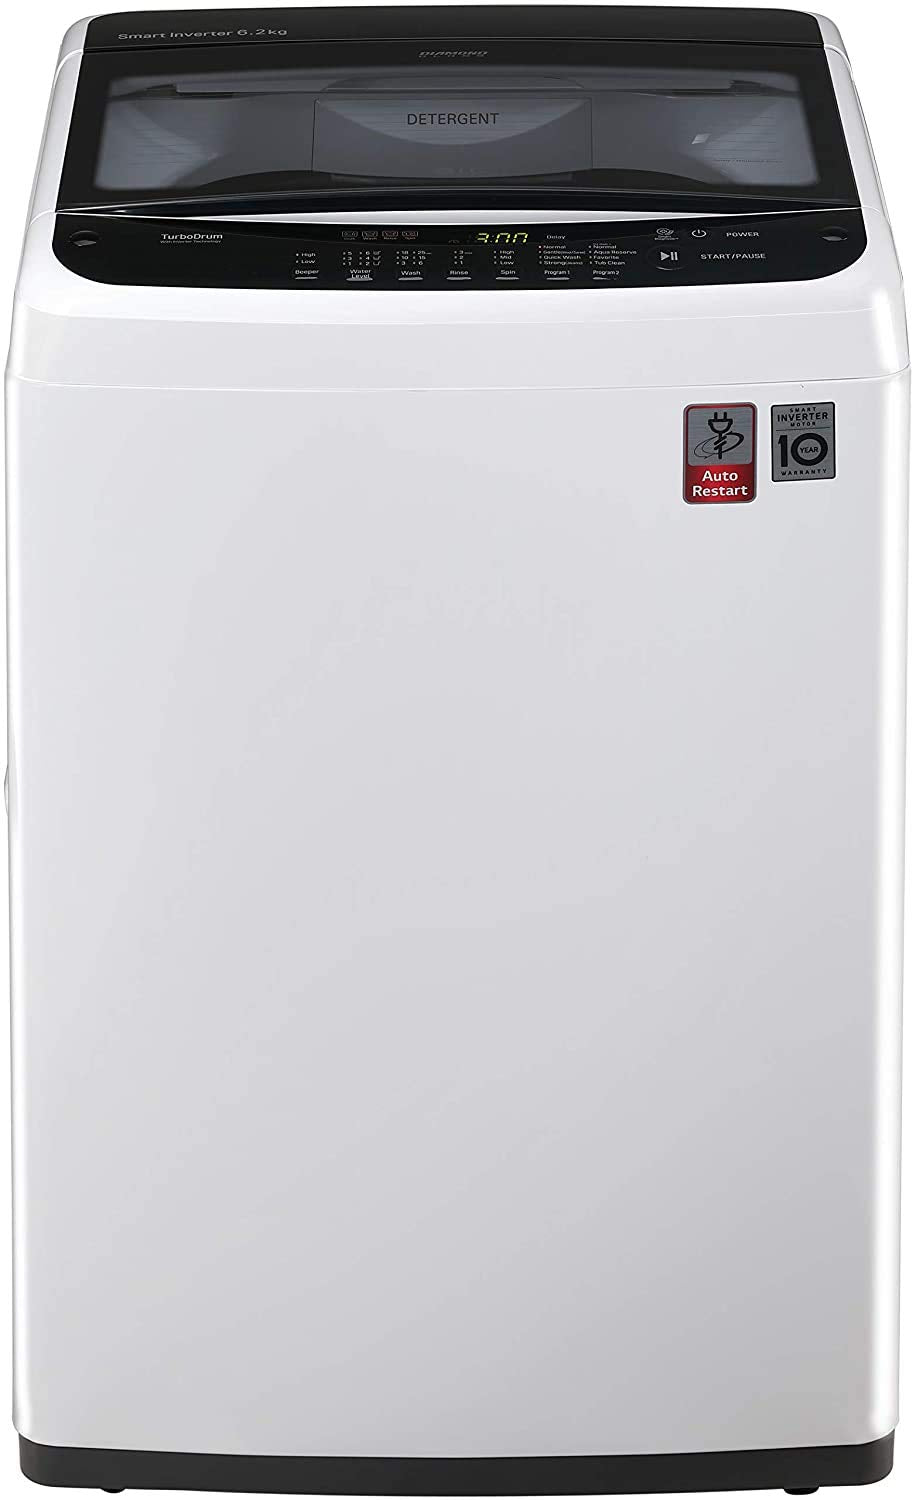 LG 6.2 kg Fully Automatic Top Loading Washing Machine T7288NDDL